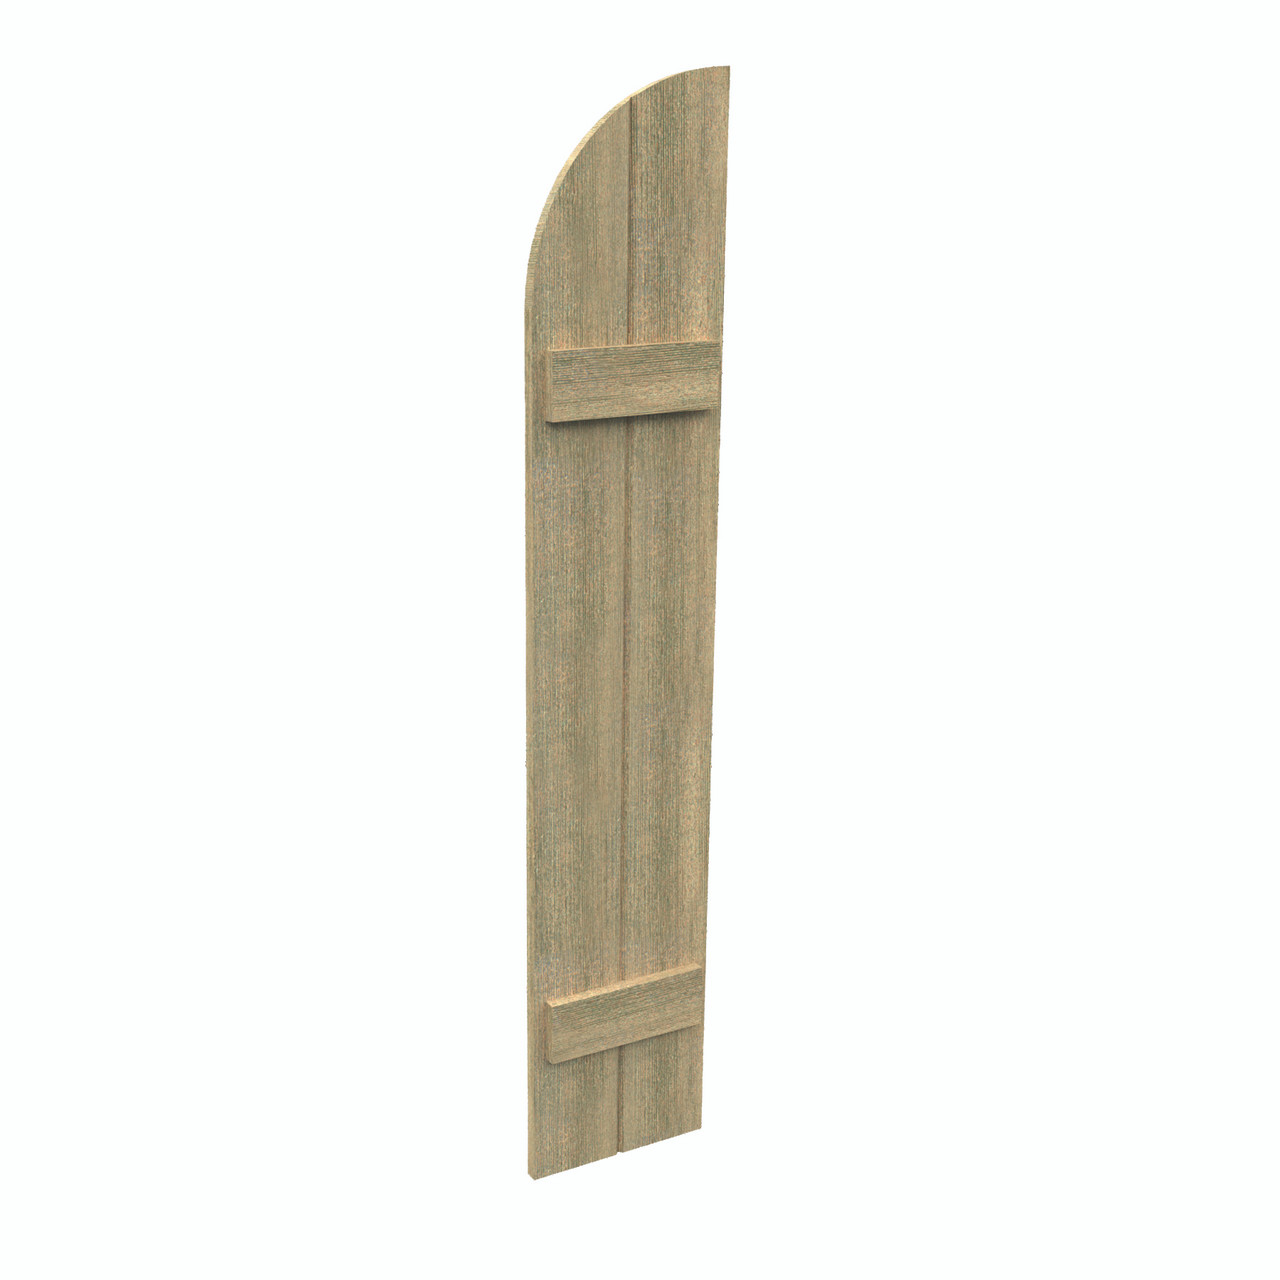 12 inch by 86 inch Quarter Round Shutter with 2-Boards